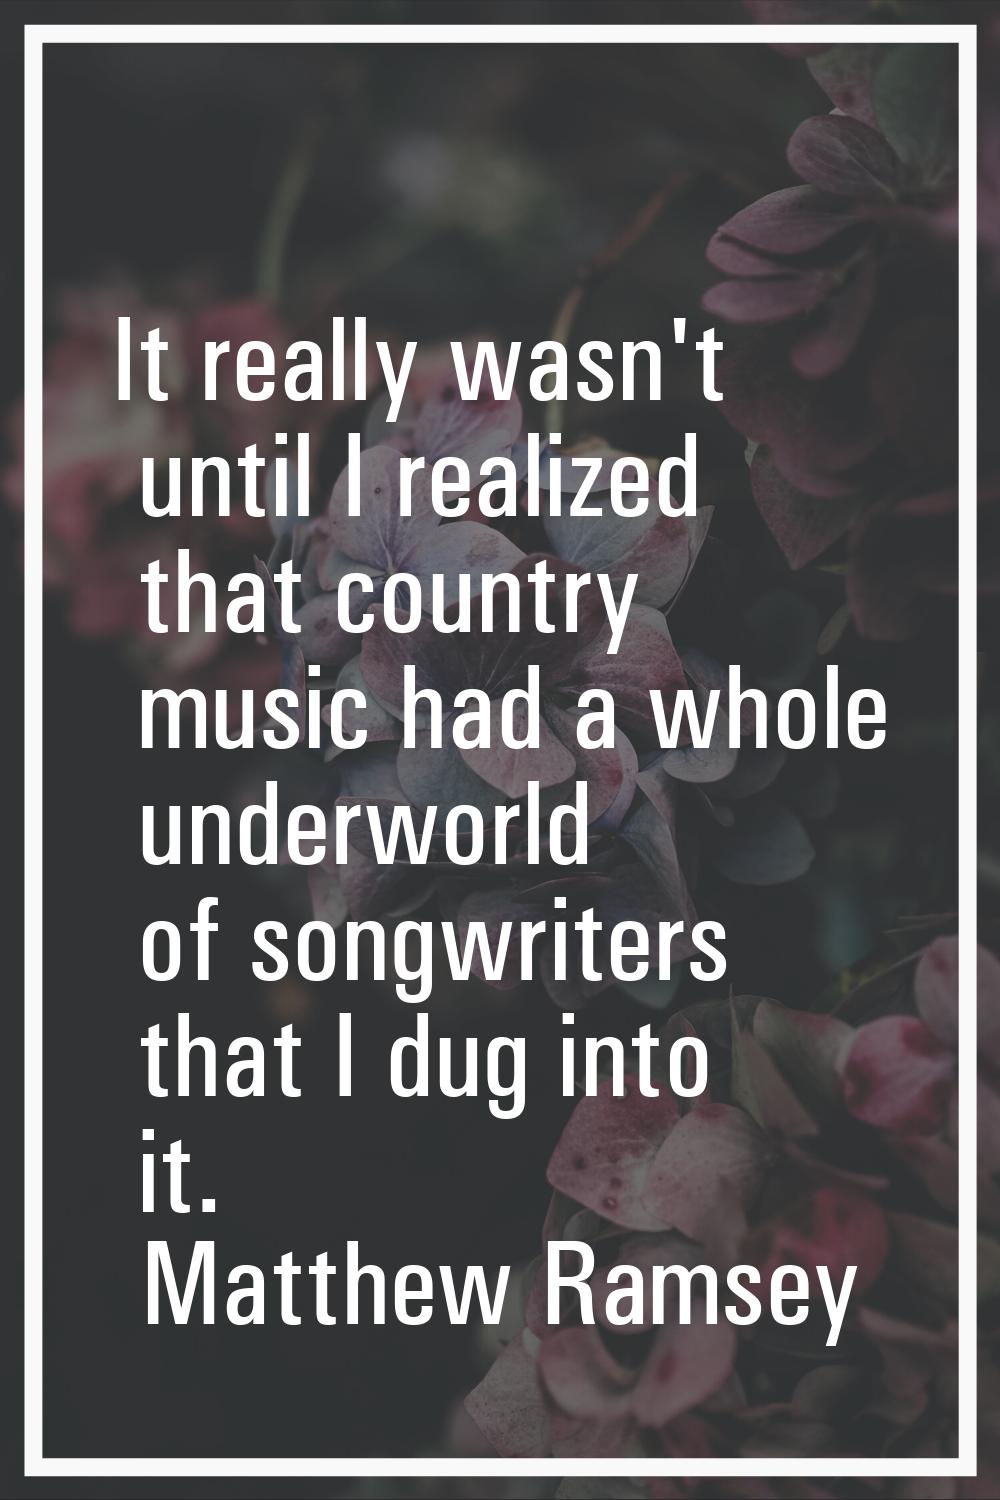 It really wasn't until I realized that country music had a whole underworld of songwriters that I d